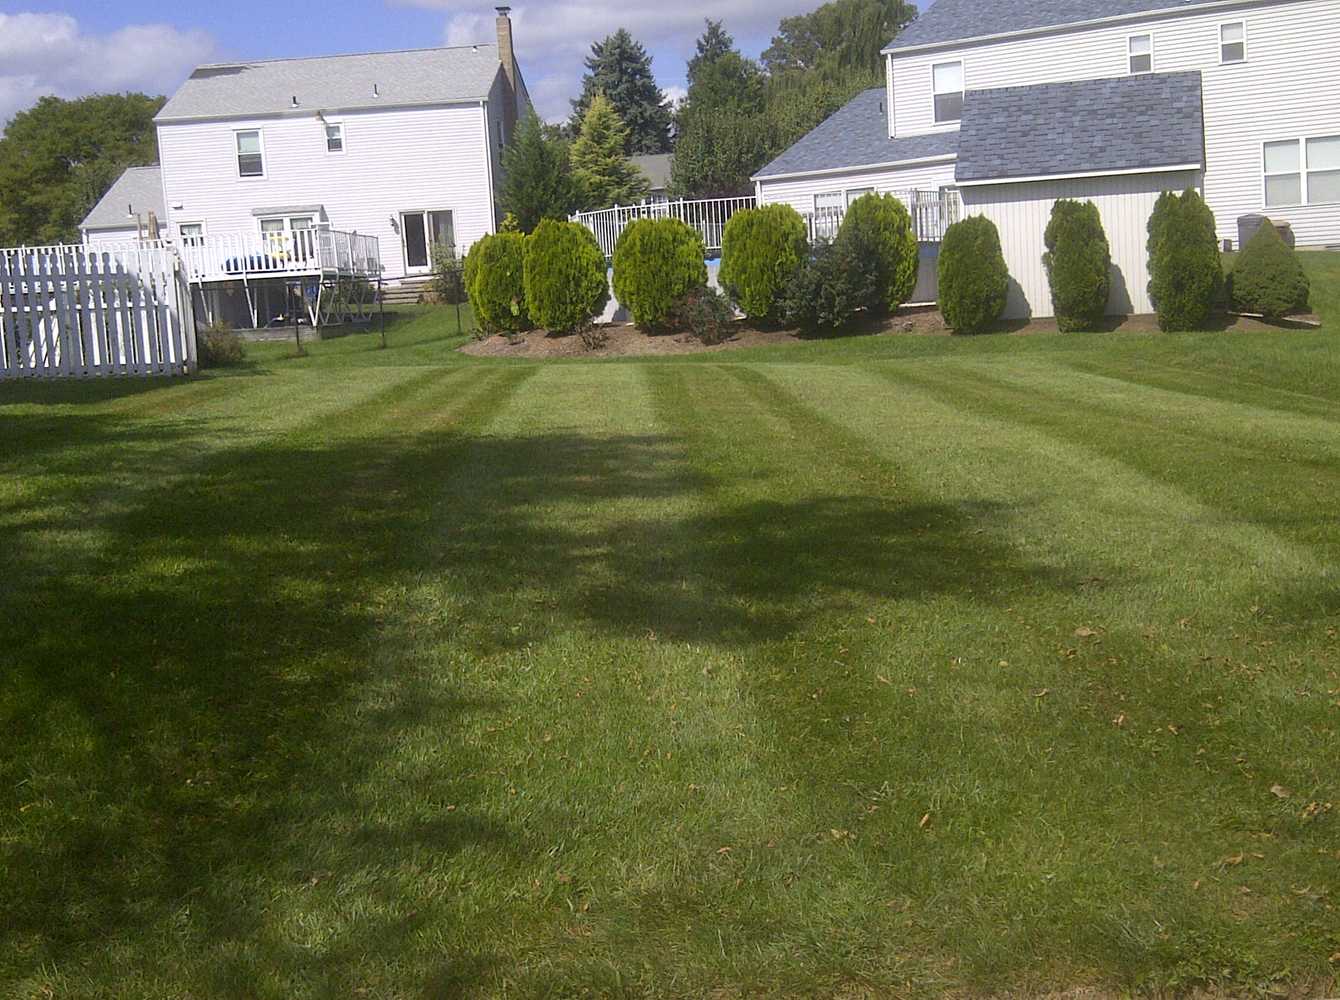 The Grass Groomers, Llc Project